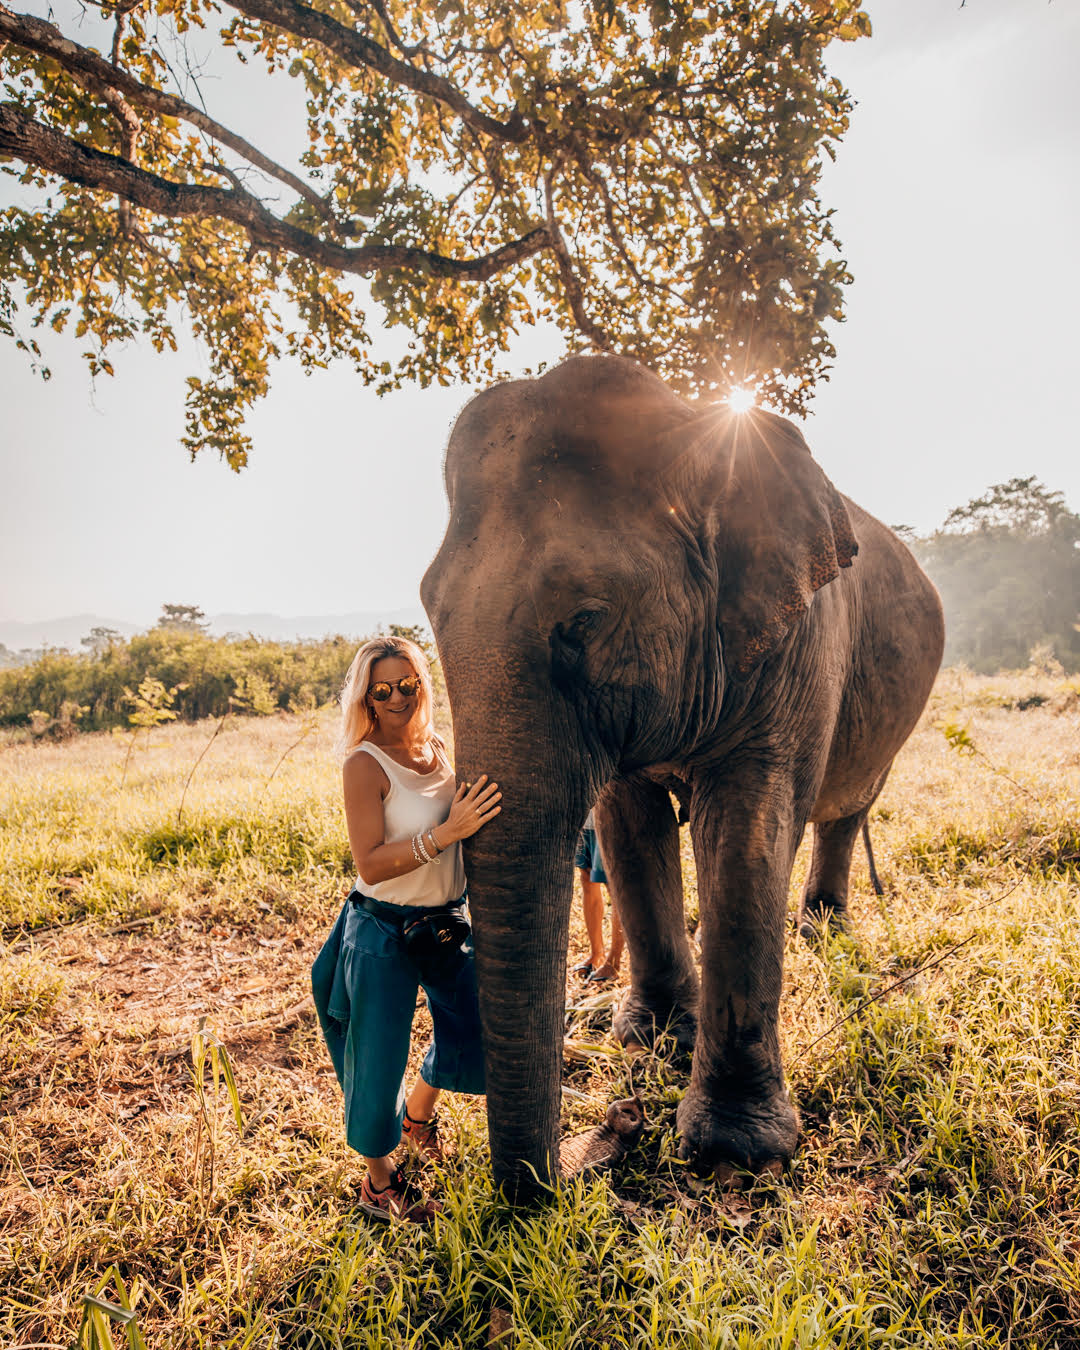 A Guide to Conscious Luxury Travel with Danielle Wilson Naqvi - About Her